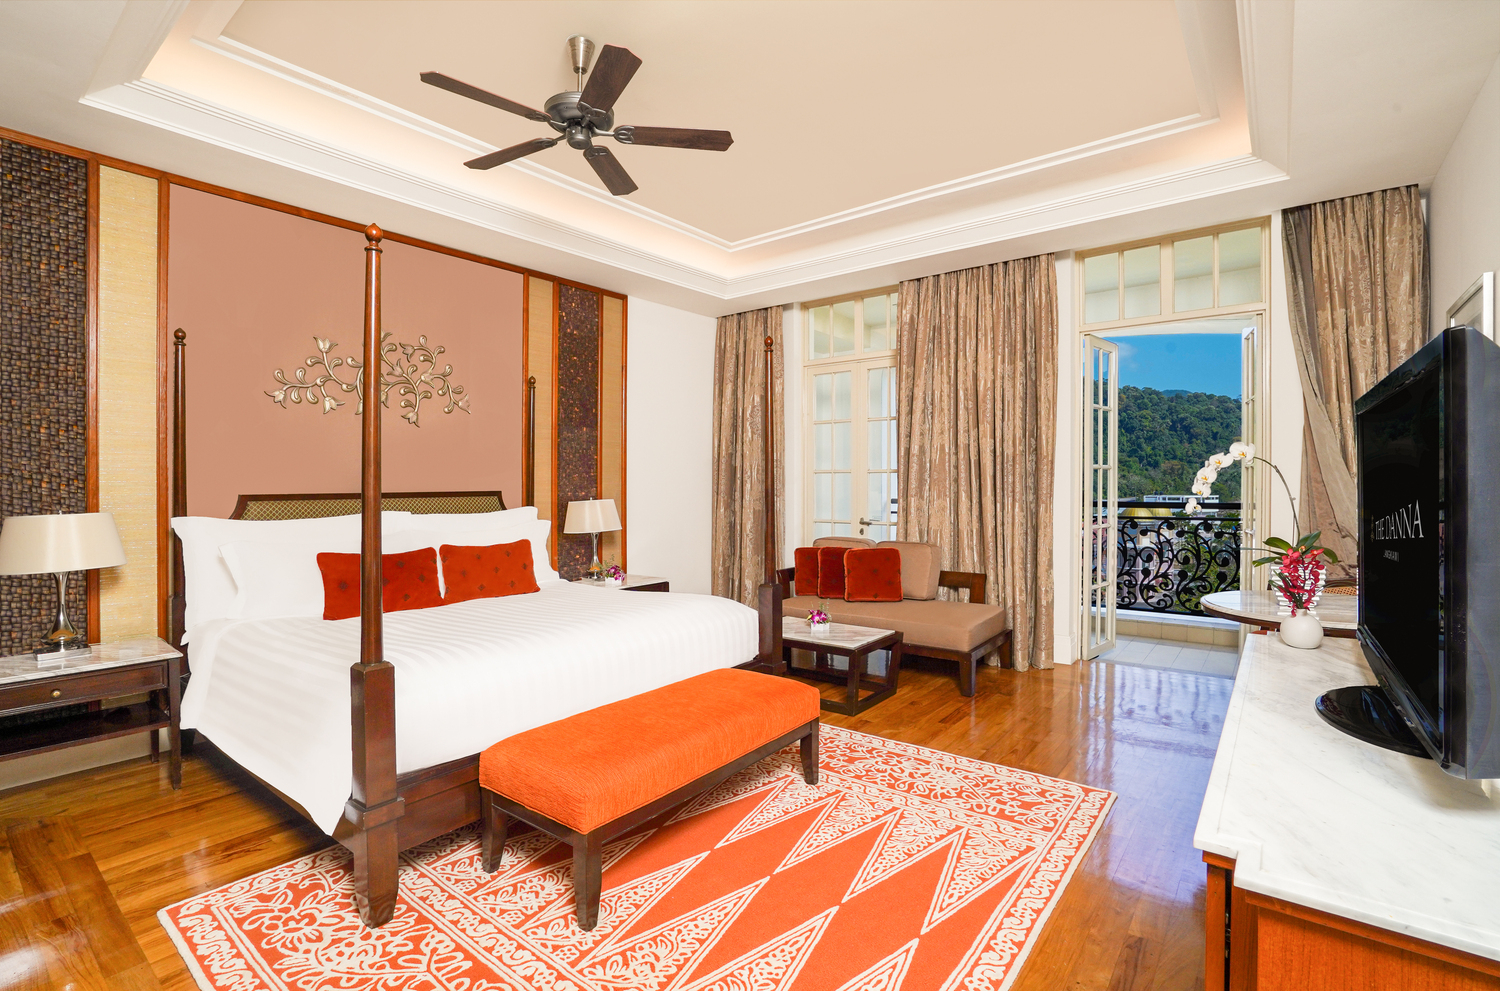 Bedroom 3, The Danna Langkawi - A Member of Small Luxury Hotels of the World, Langkawi